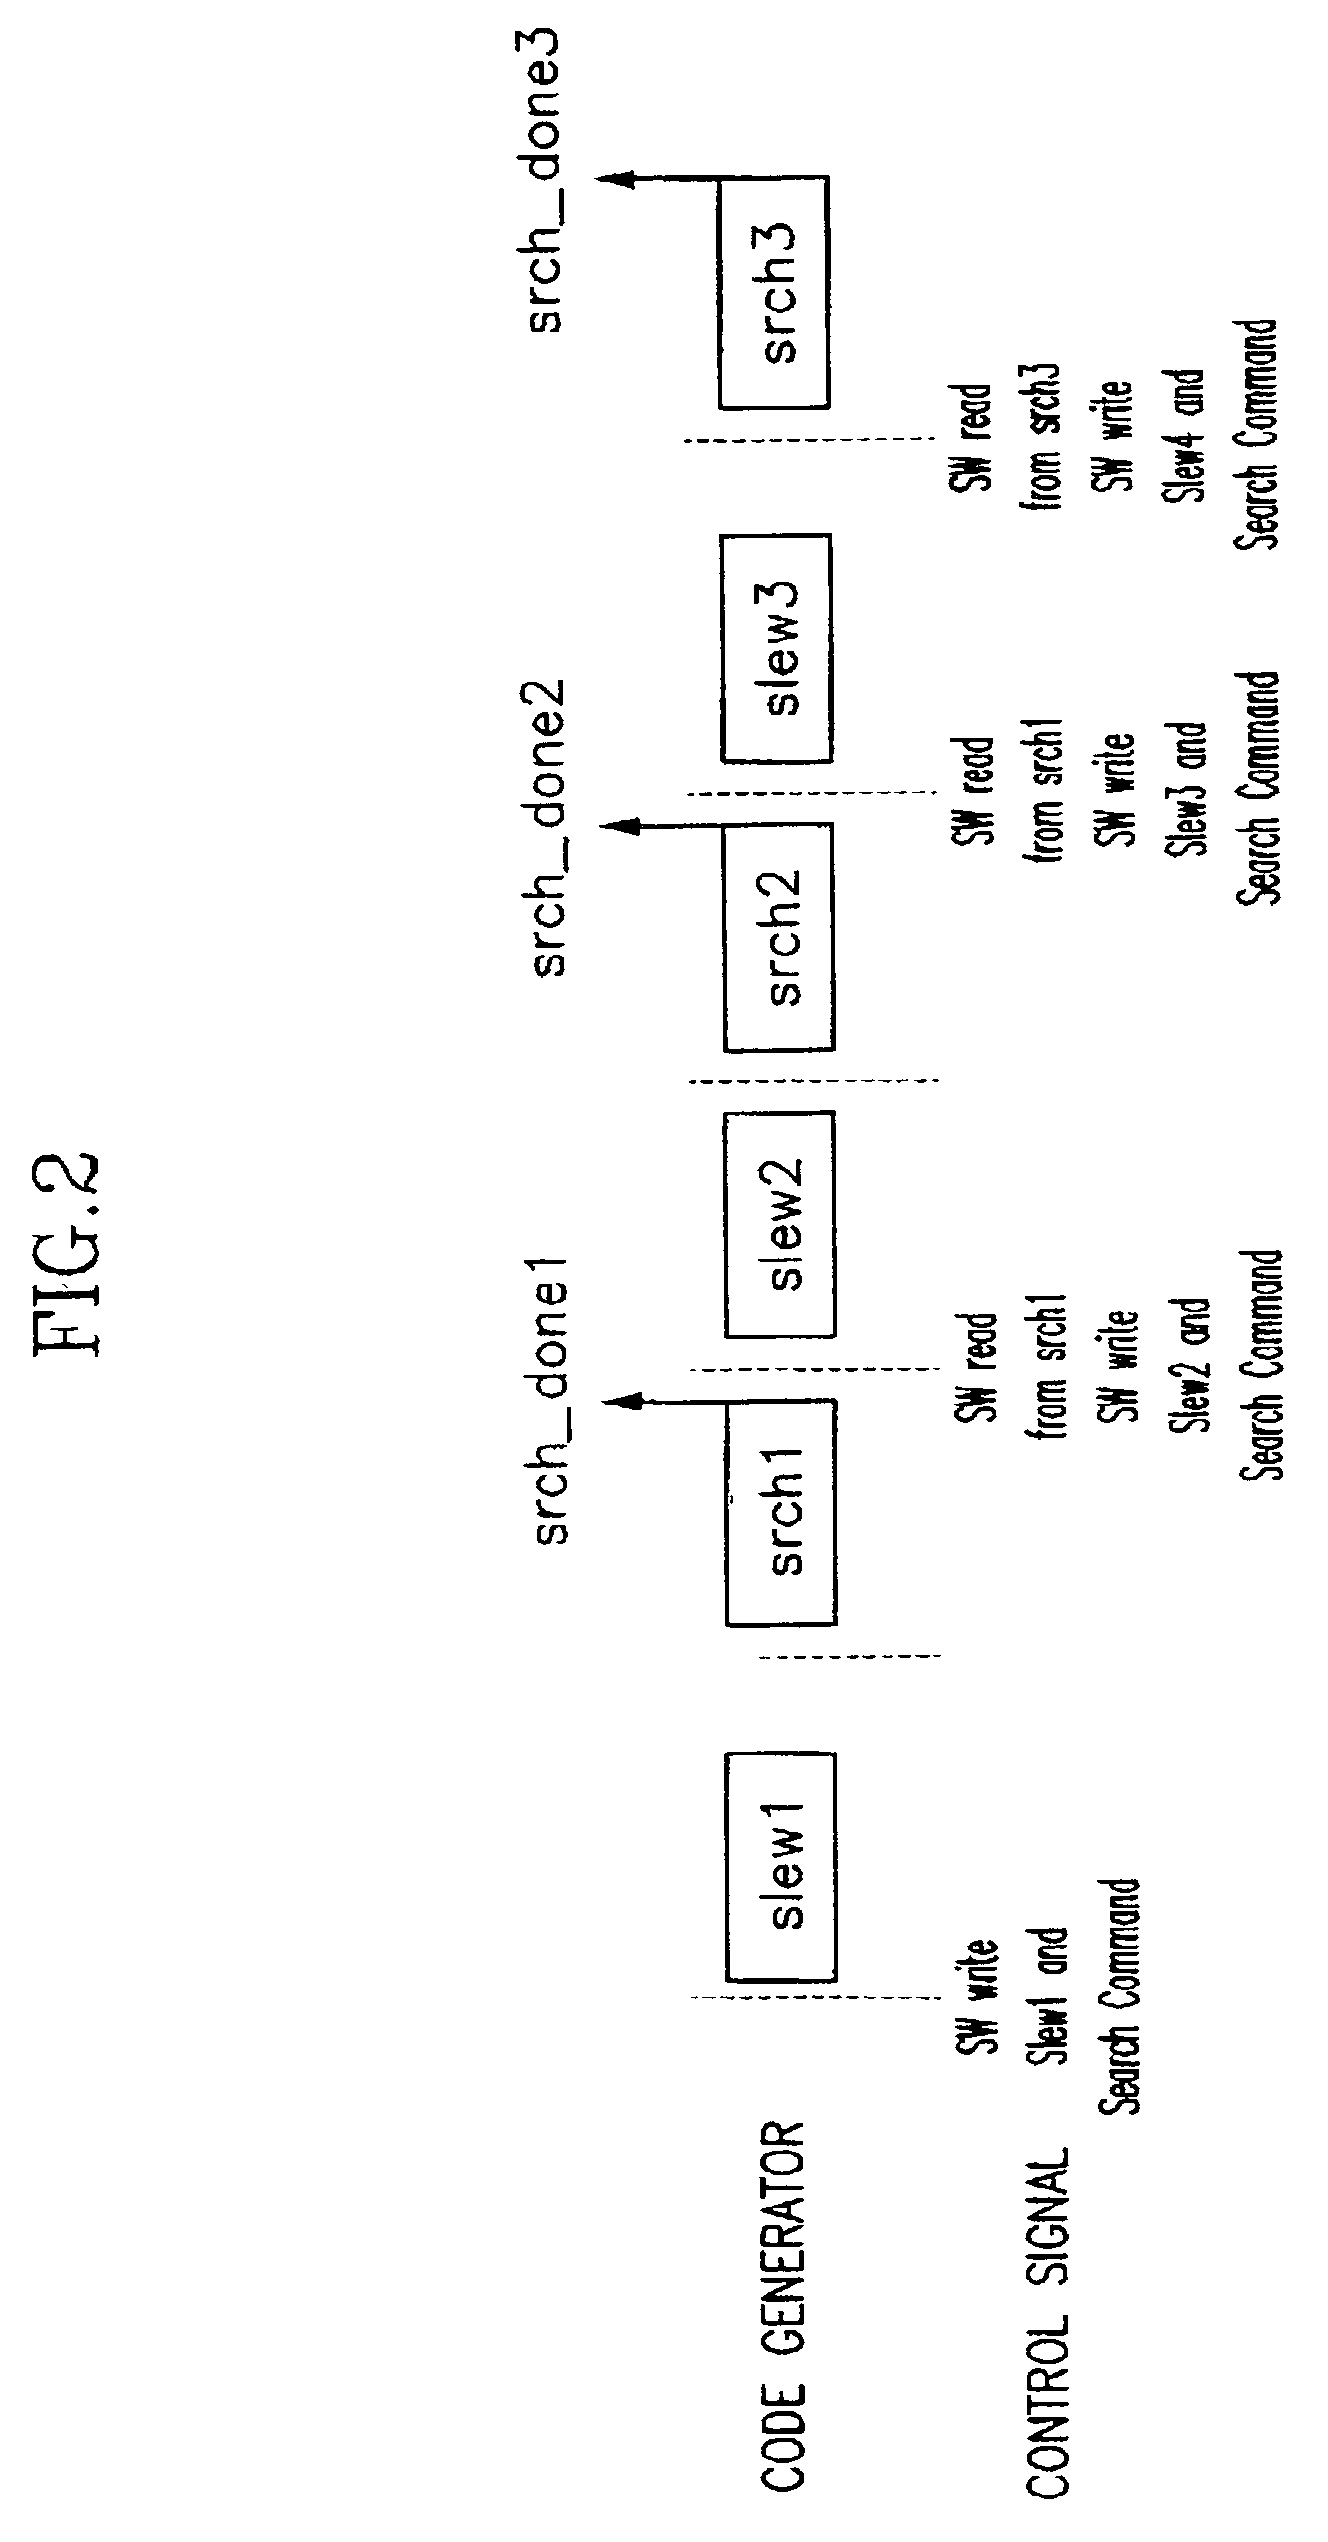 Apparatus and method for multi-path search using dual code generators